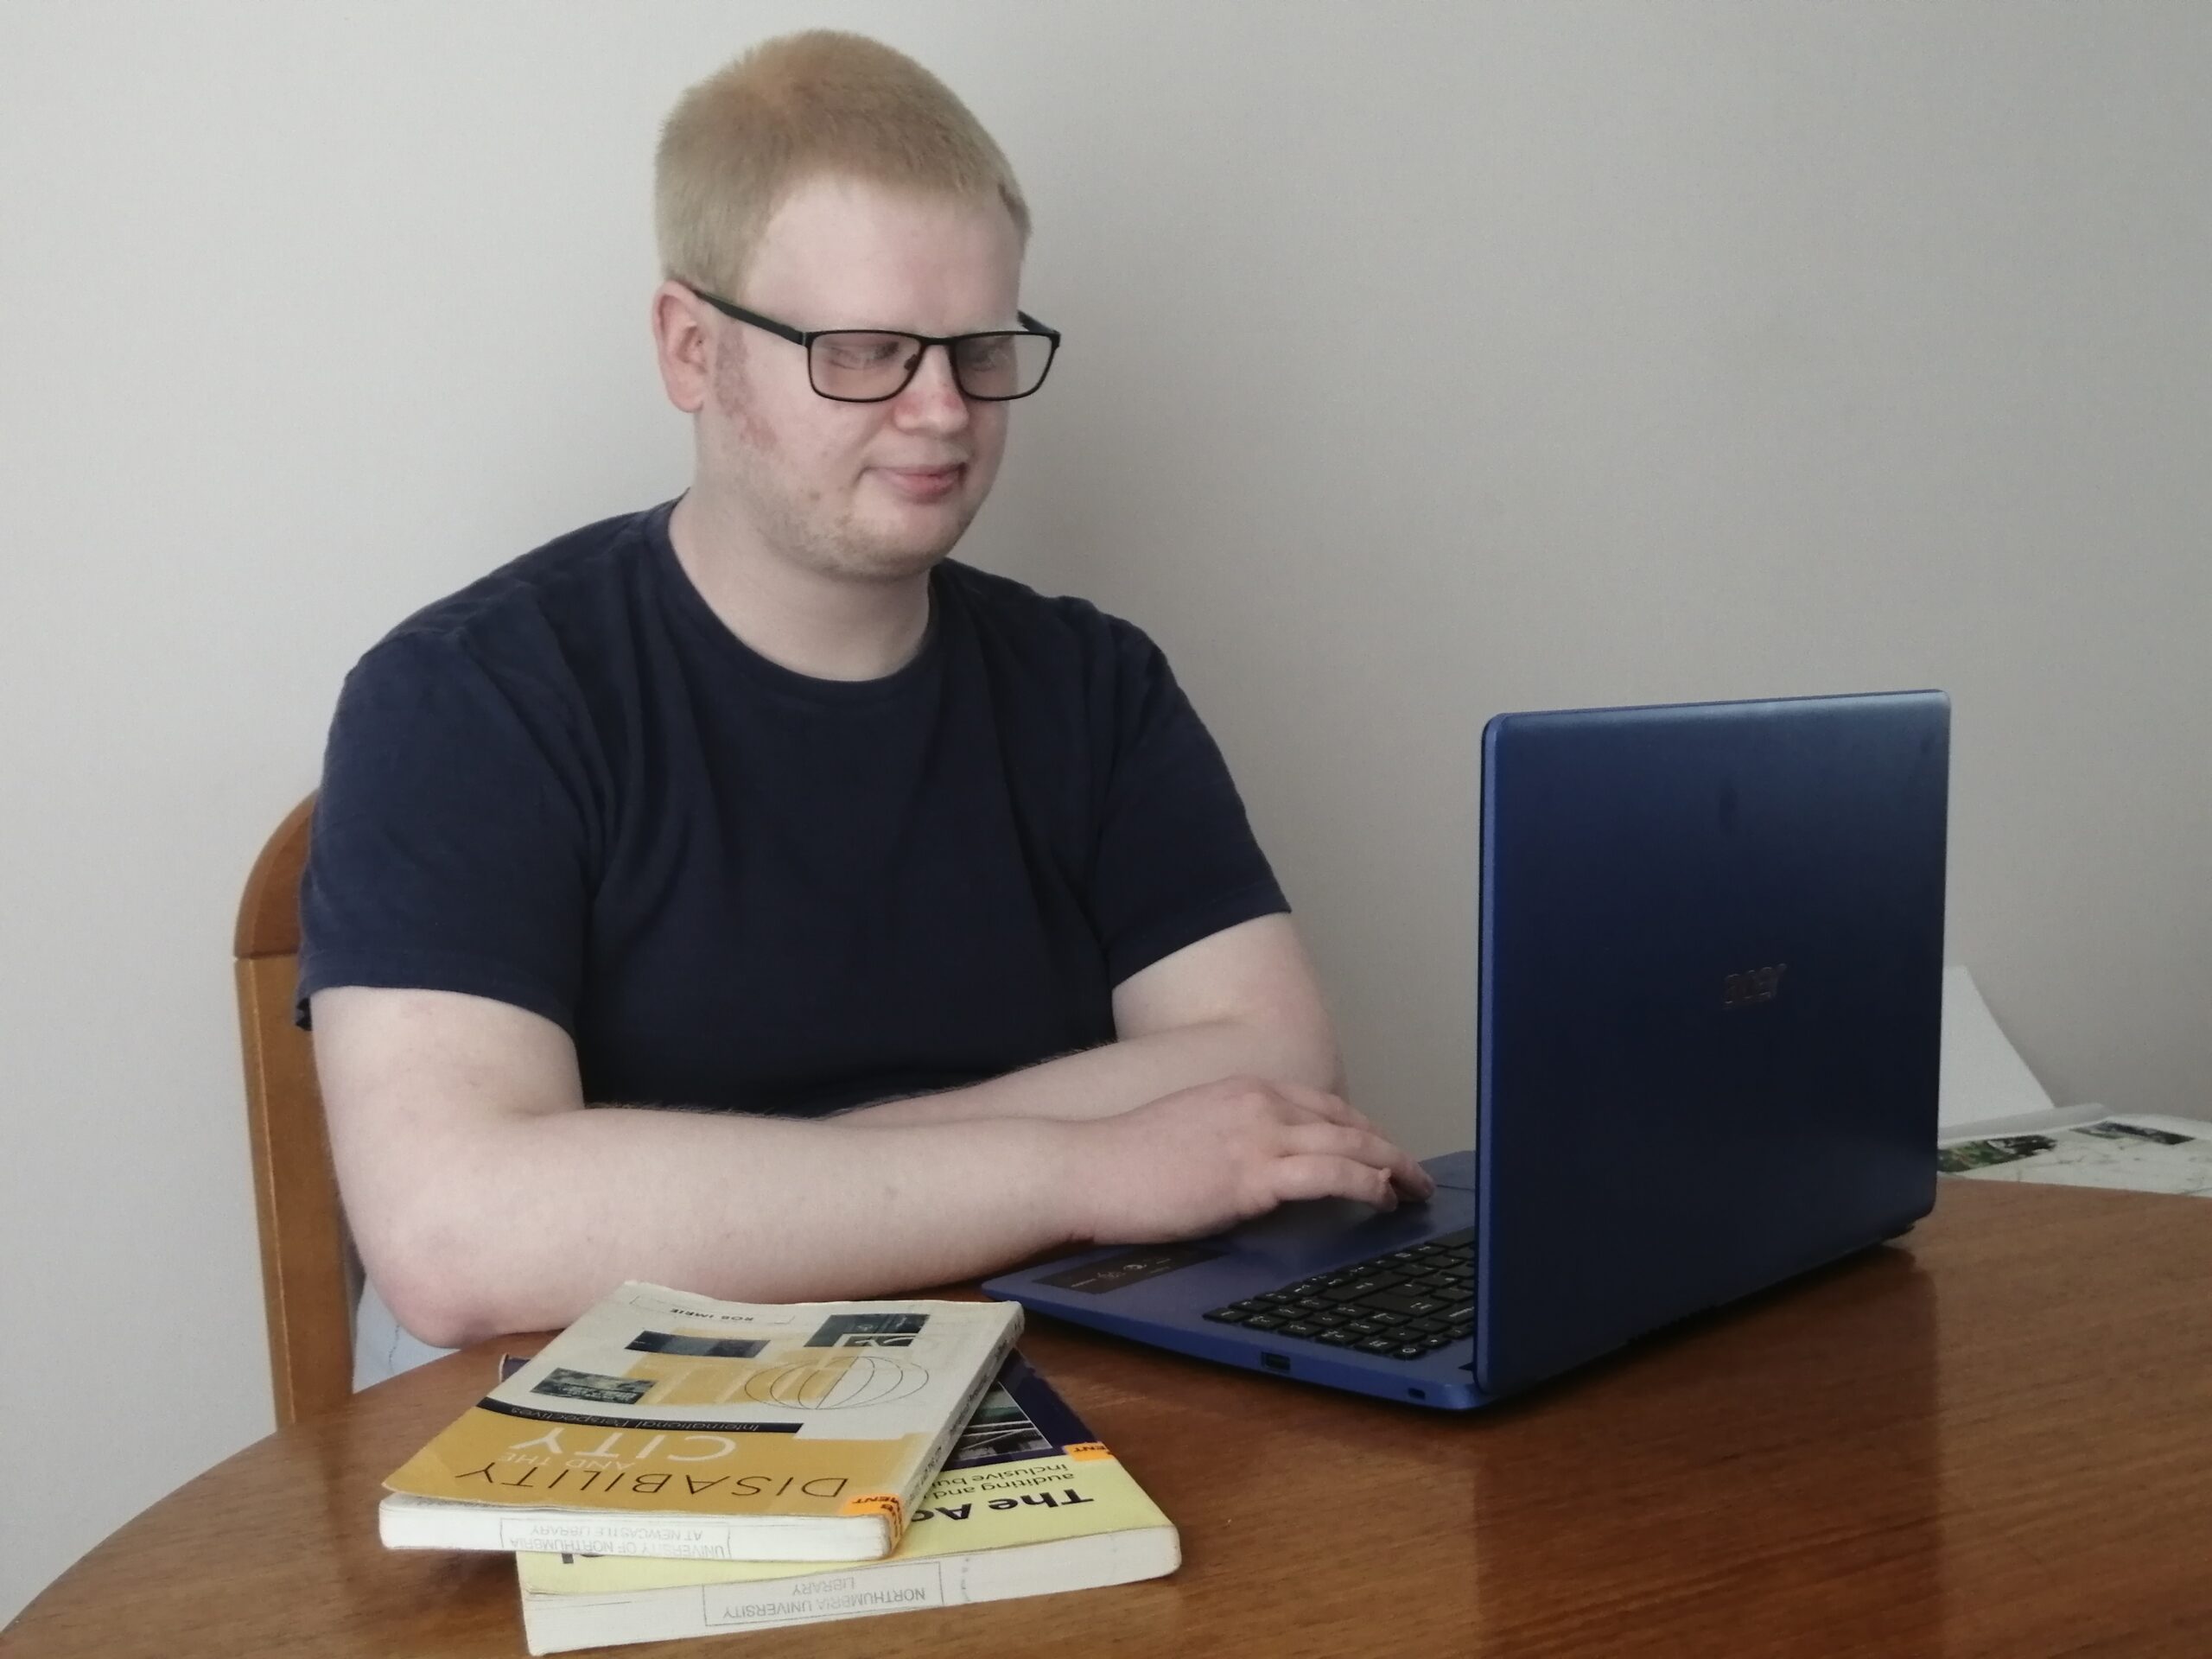 Matthew’s research on albinism